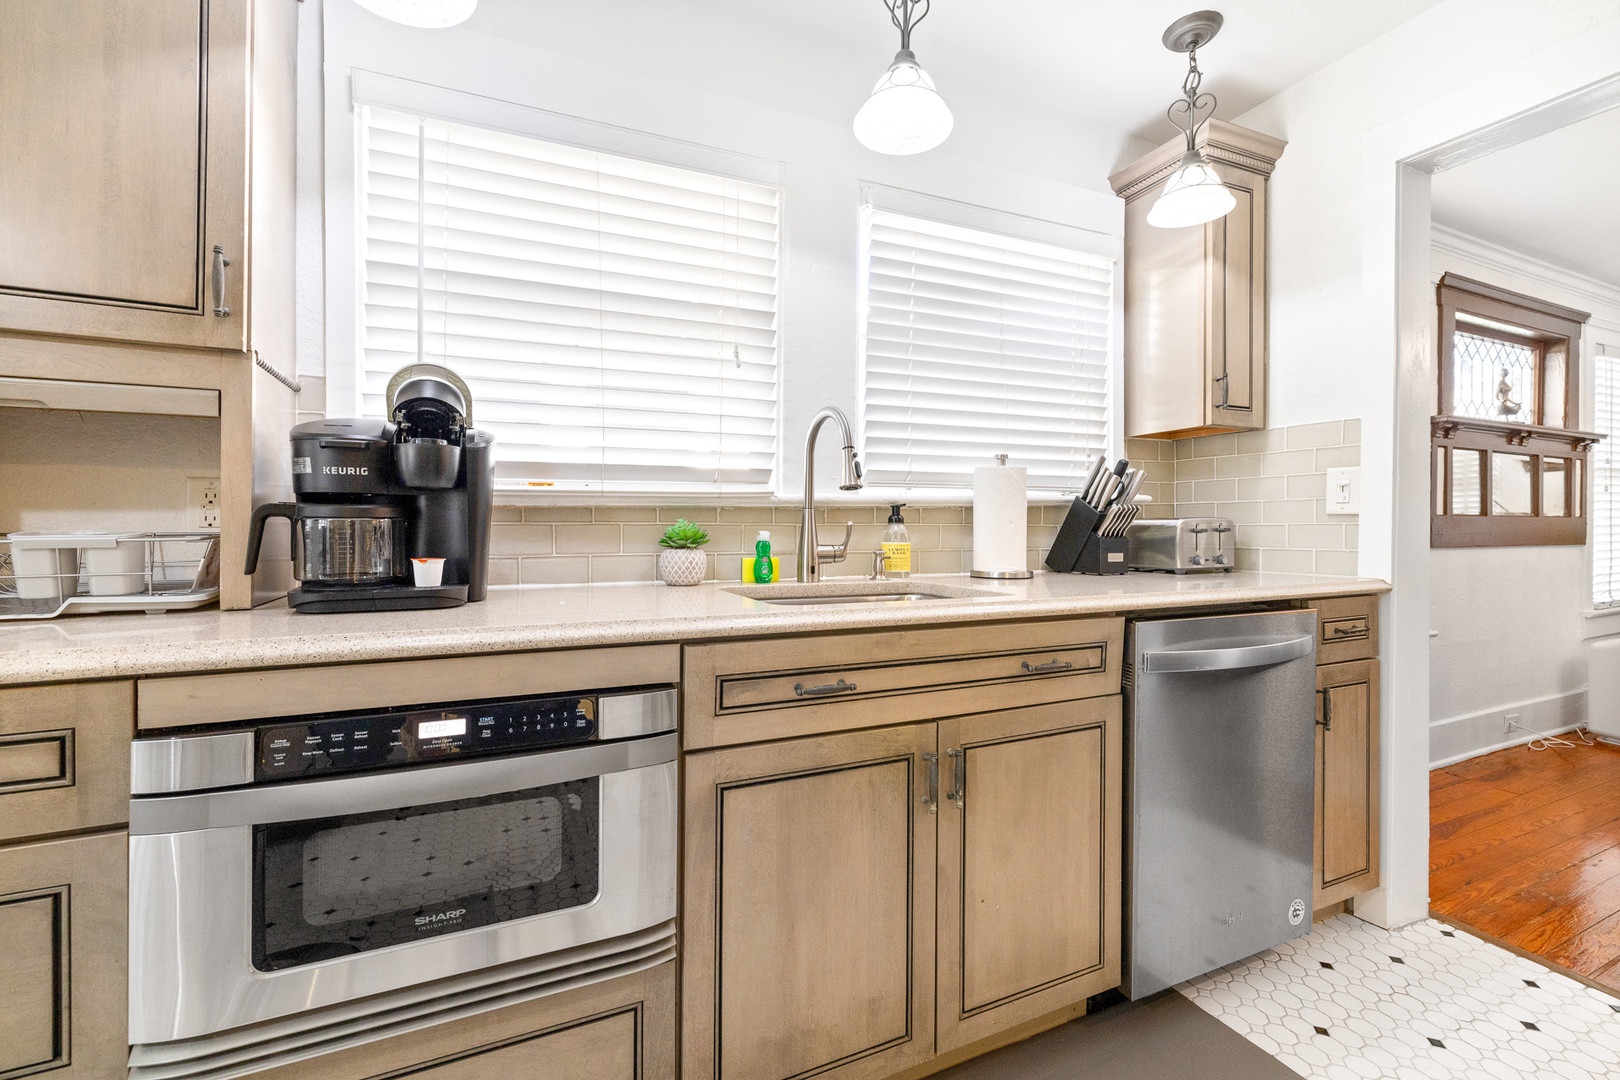 The breezy kitchen offers ample storage space & all the comforts of home